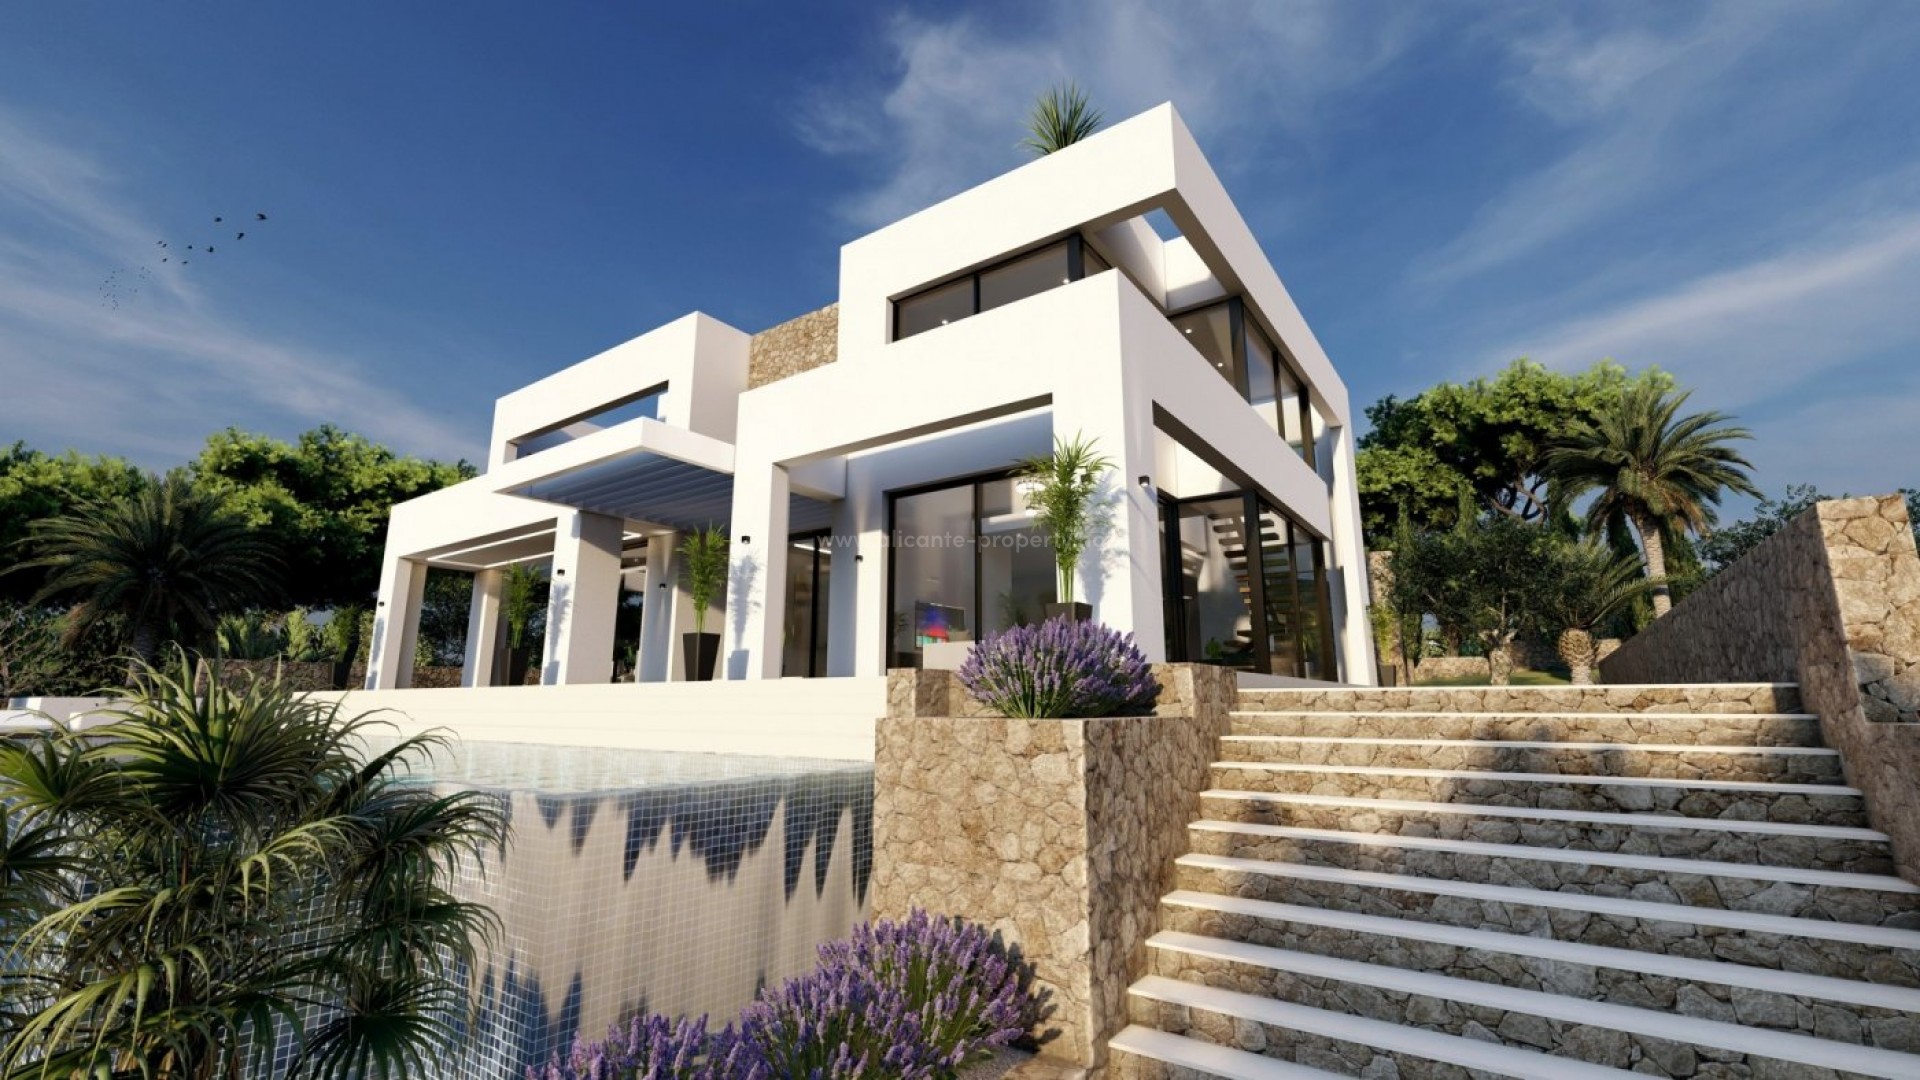 Luxury villa in Benissa with 4 bedrooms and 4 bathrooms, large infinity pool, terraces, complete quality throughout the house